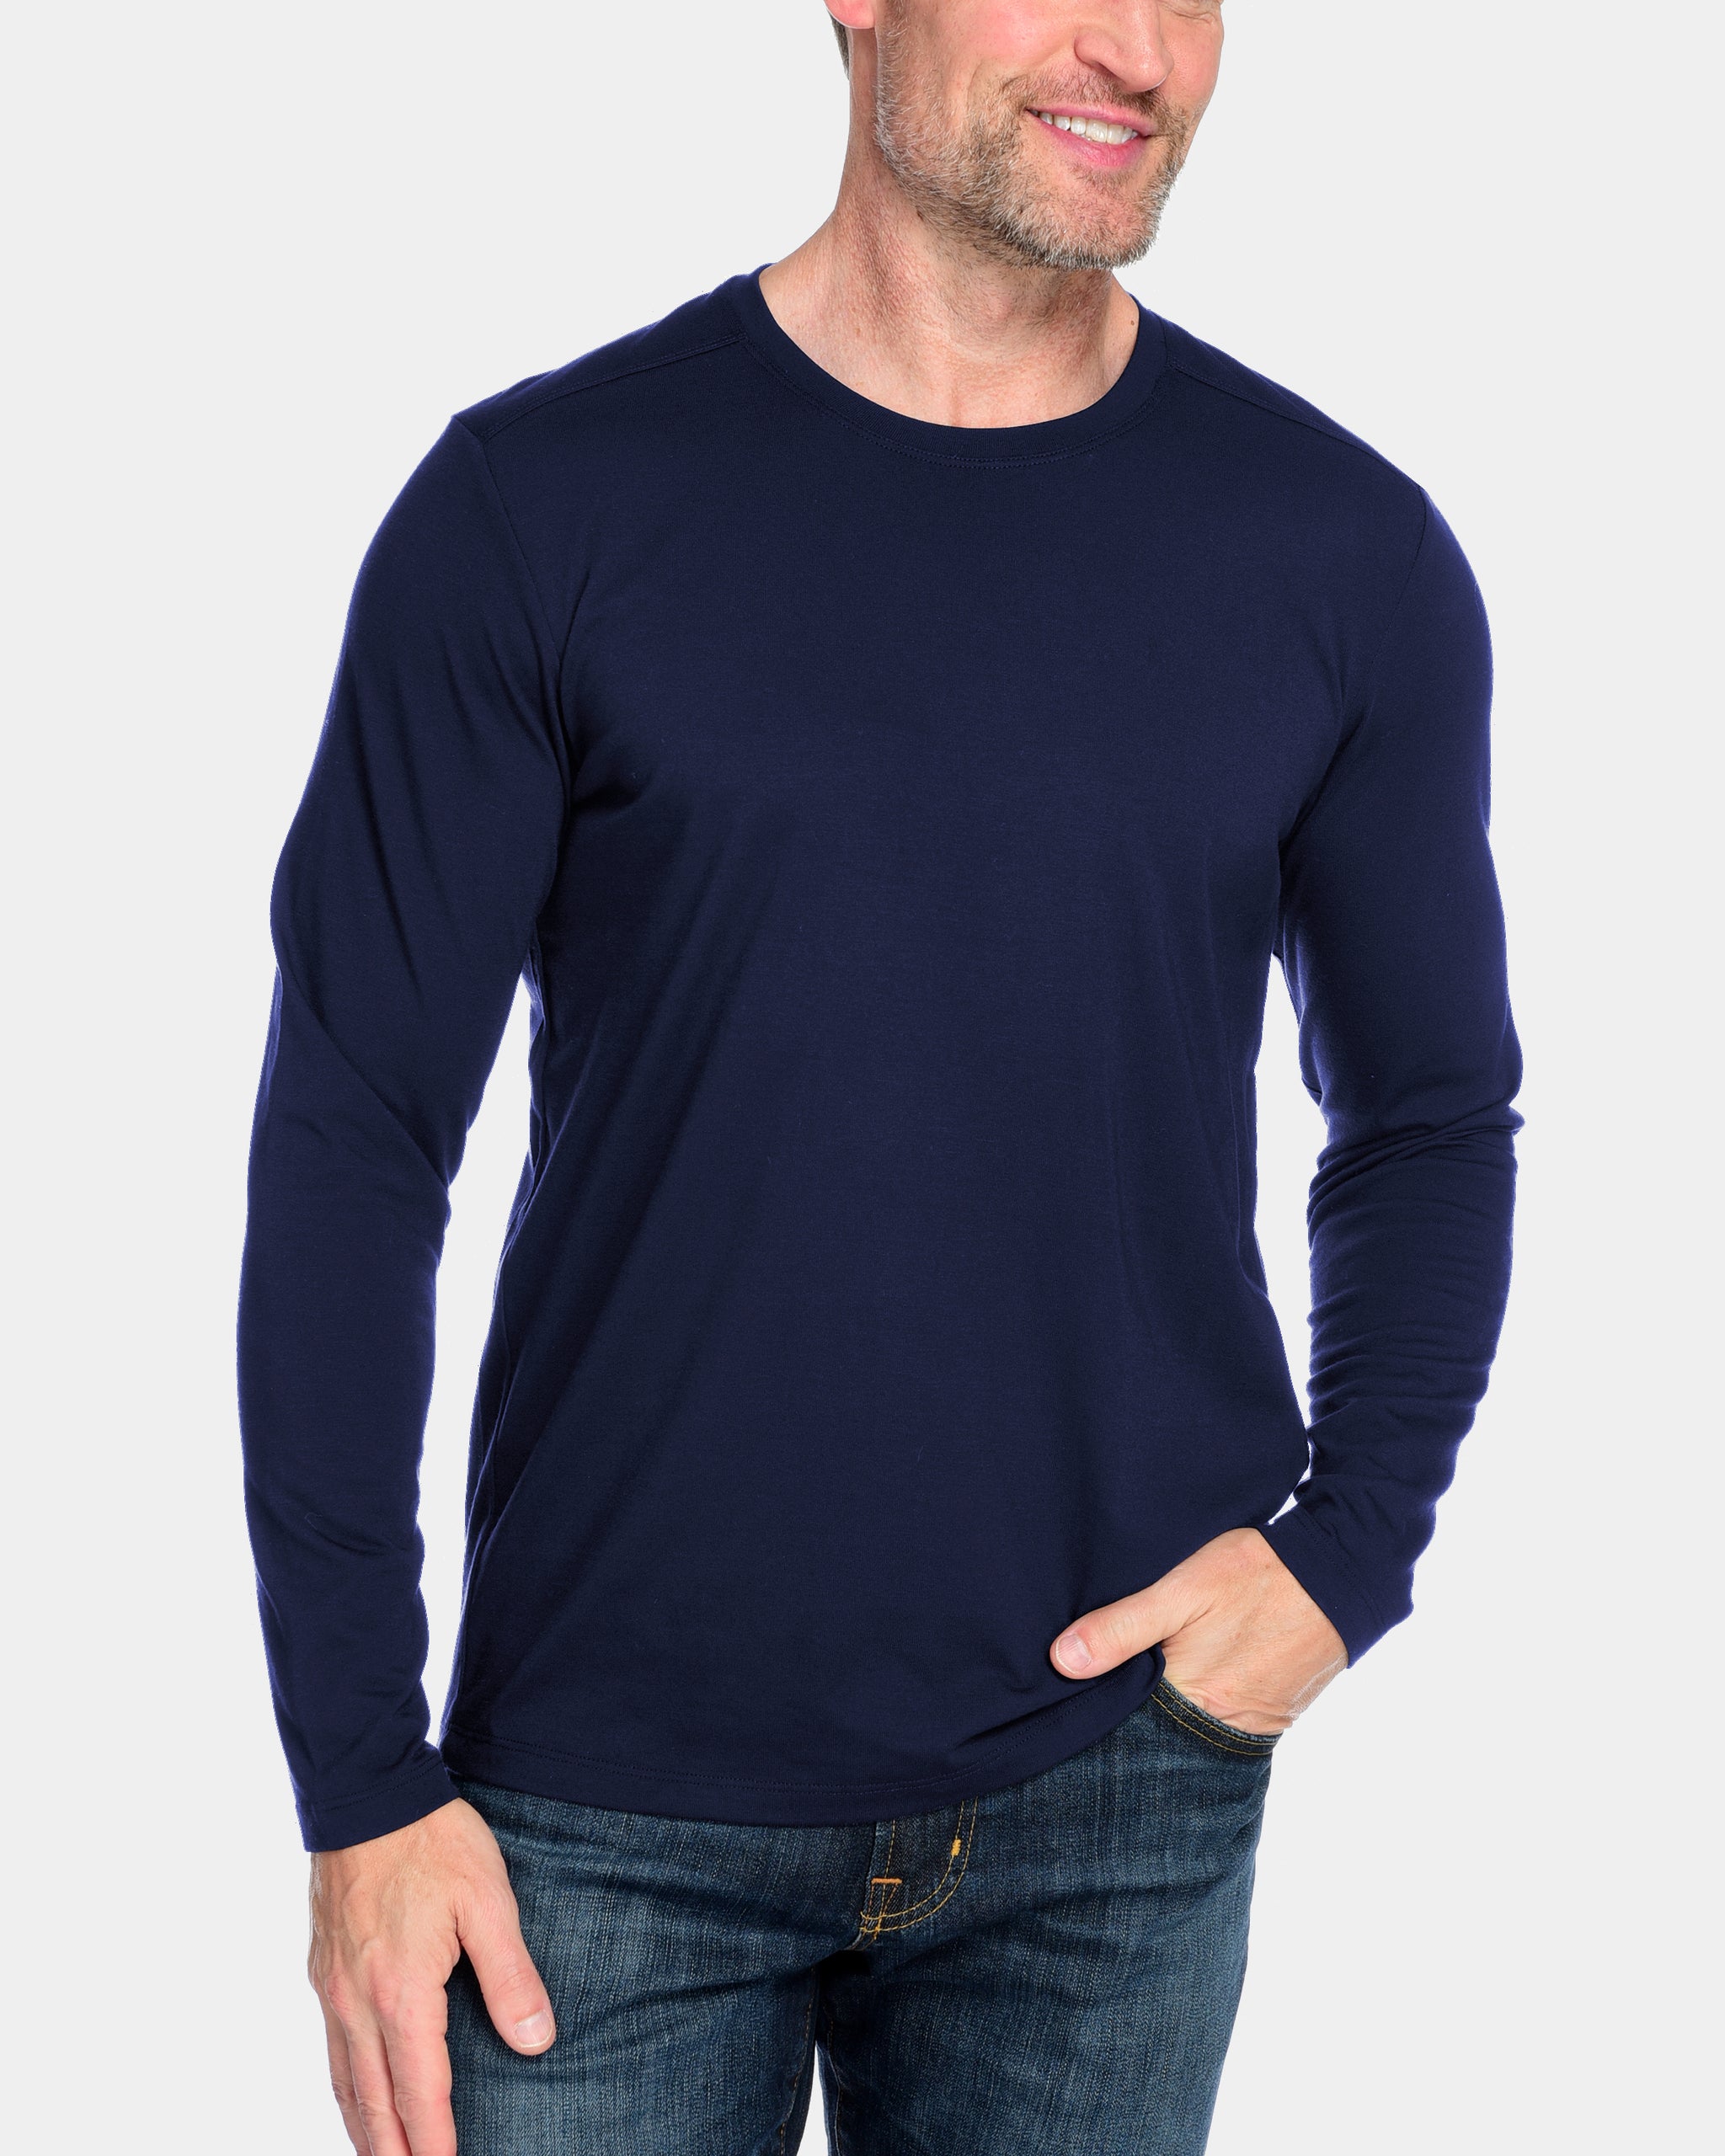 Men's Everyday Cashmere Long Sleeve Crew T-Shirt by Fisher + Baker